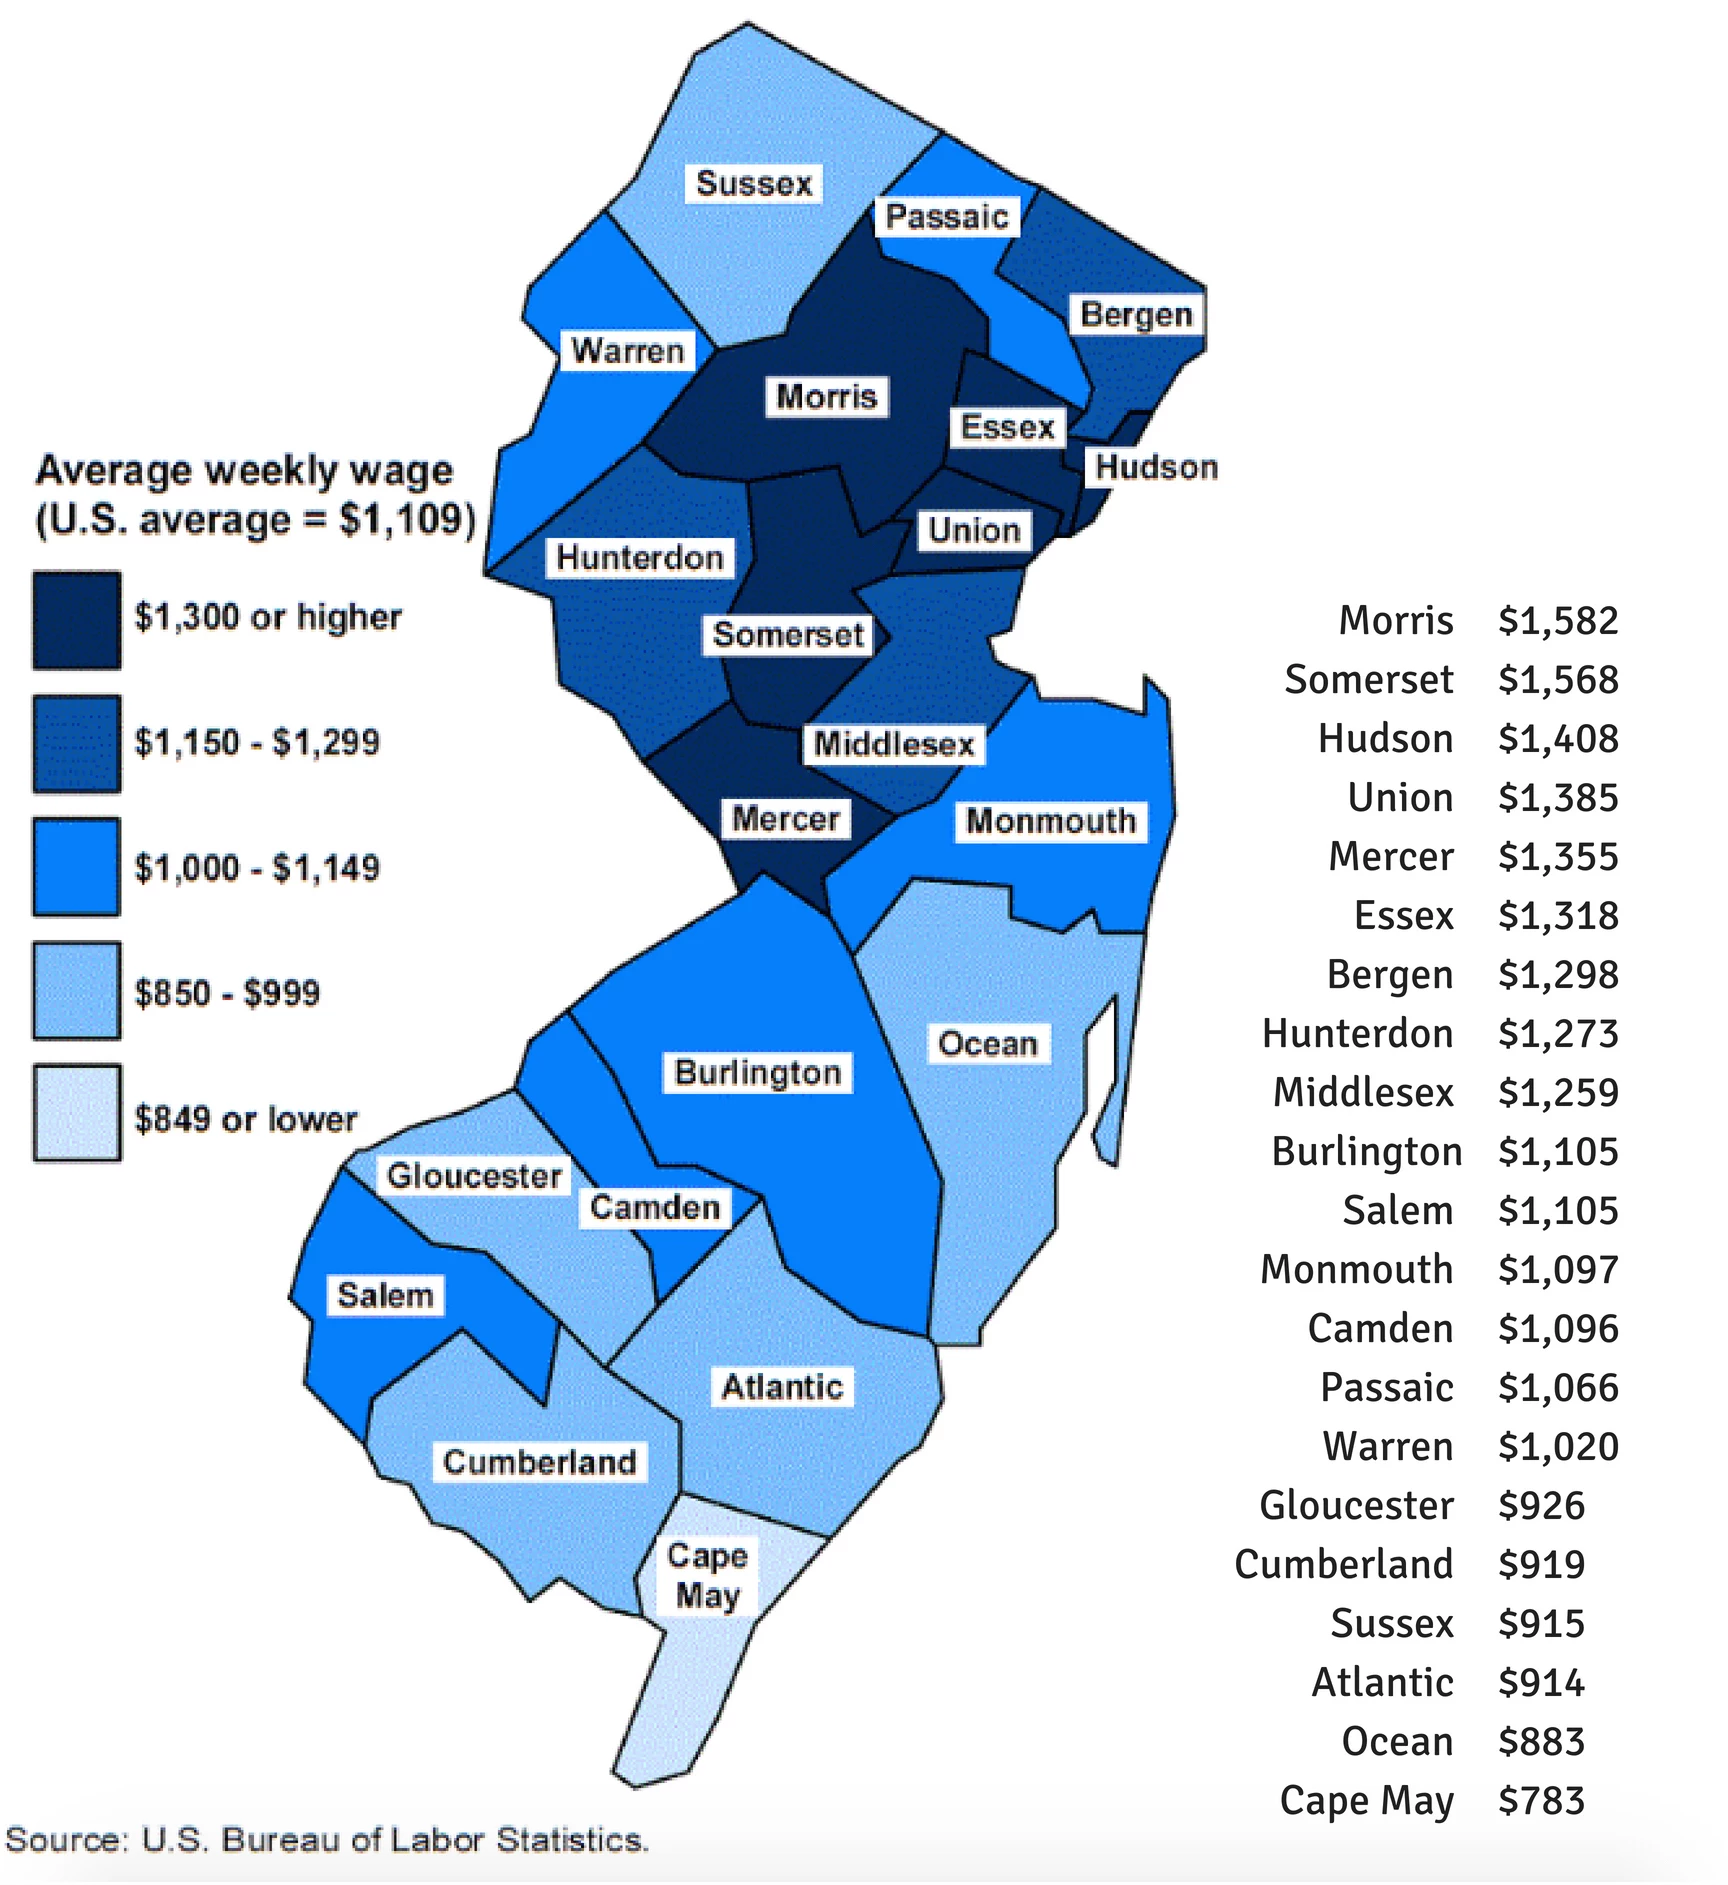 North Jersey vs. South Jersey: Where do jobs pay more?